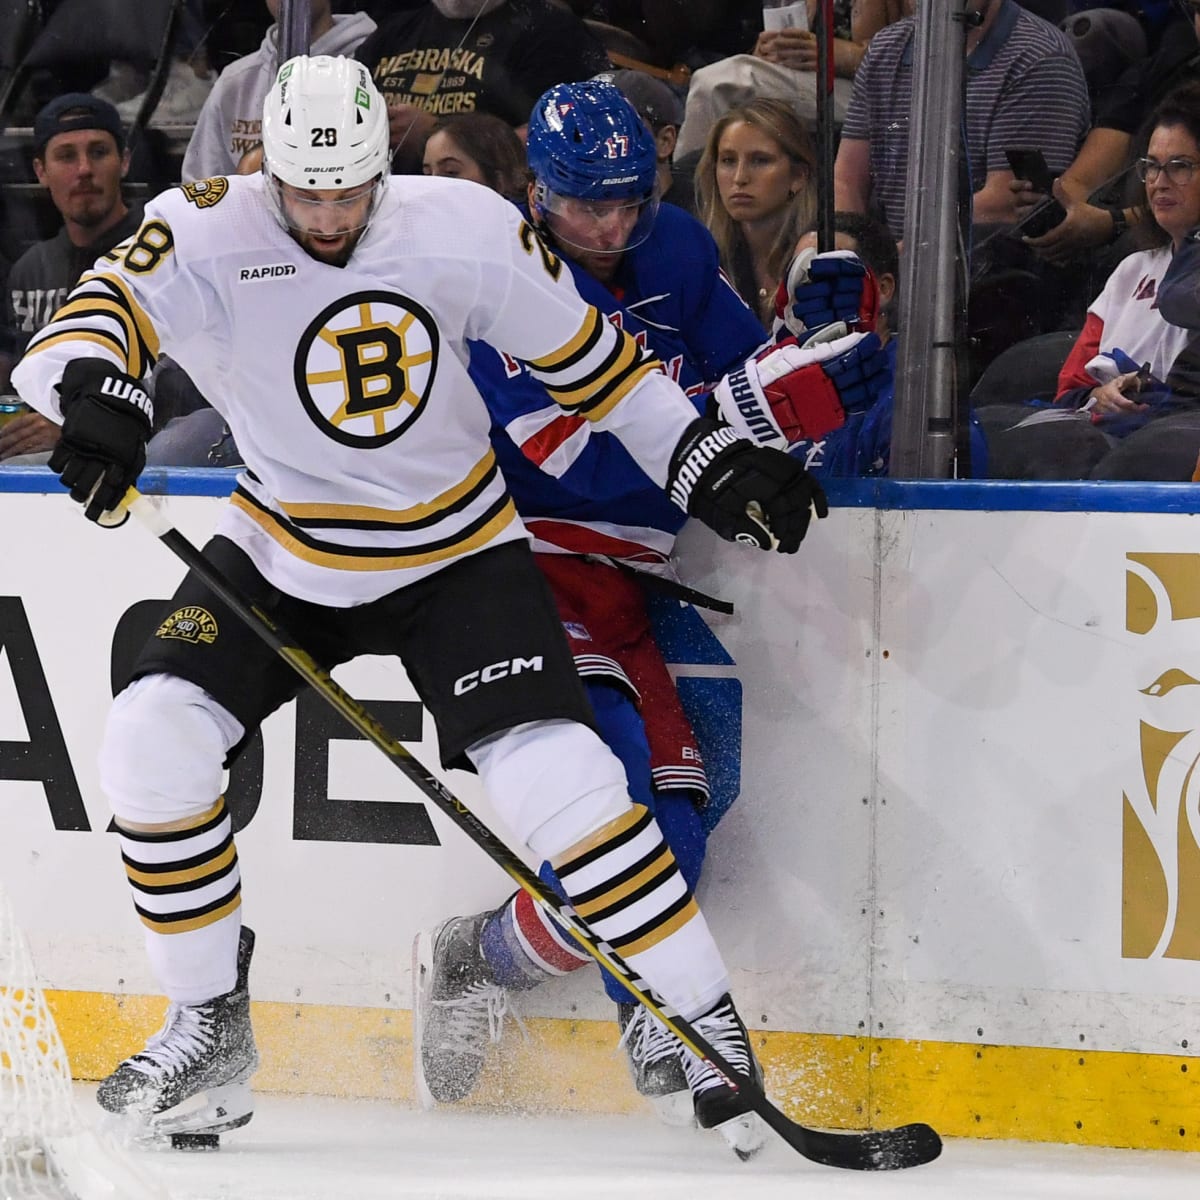 Here's a look at the Bruins' likely opening-night roster